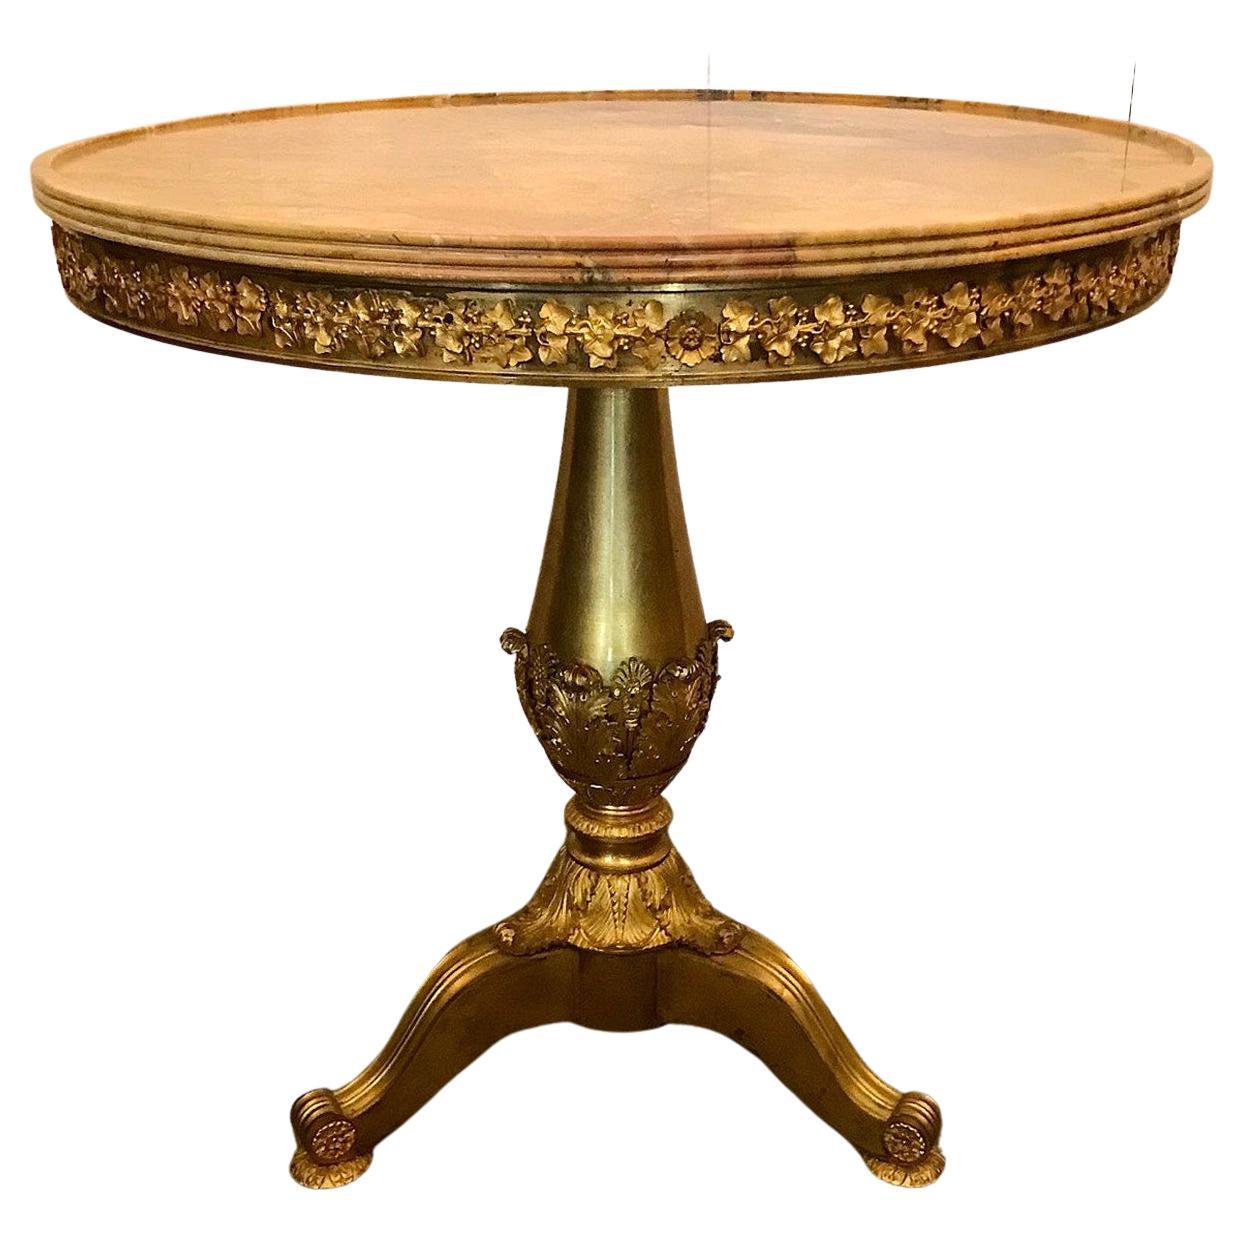 An important Restauration period ormolu Gueridon, c. 1820, Attributed to Thomire For Sale